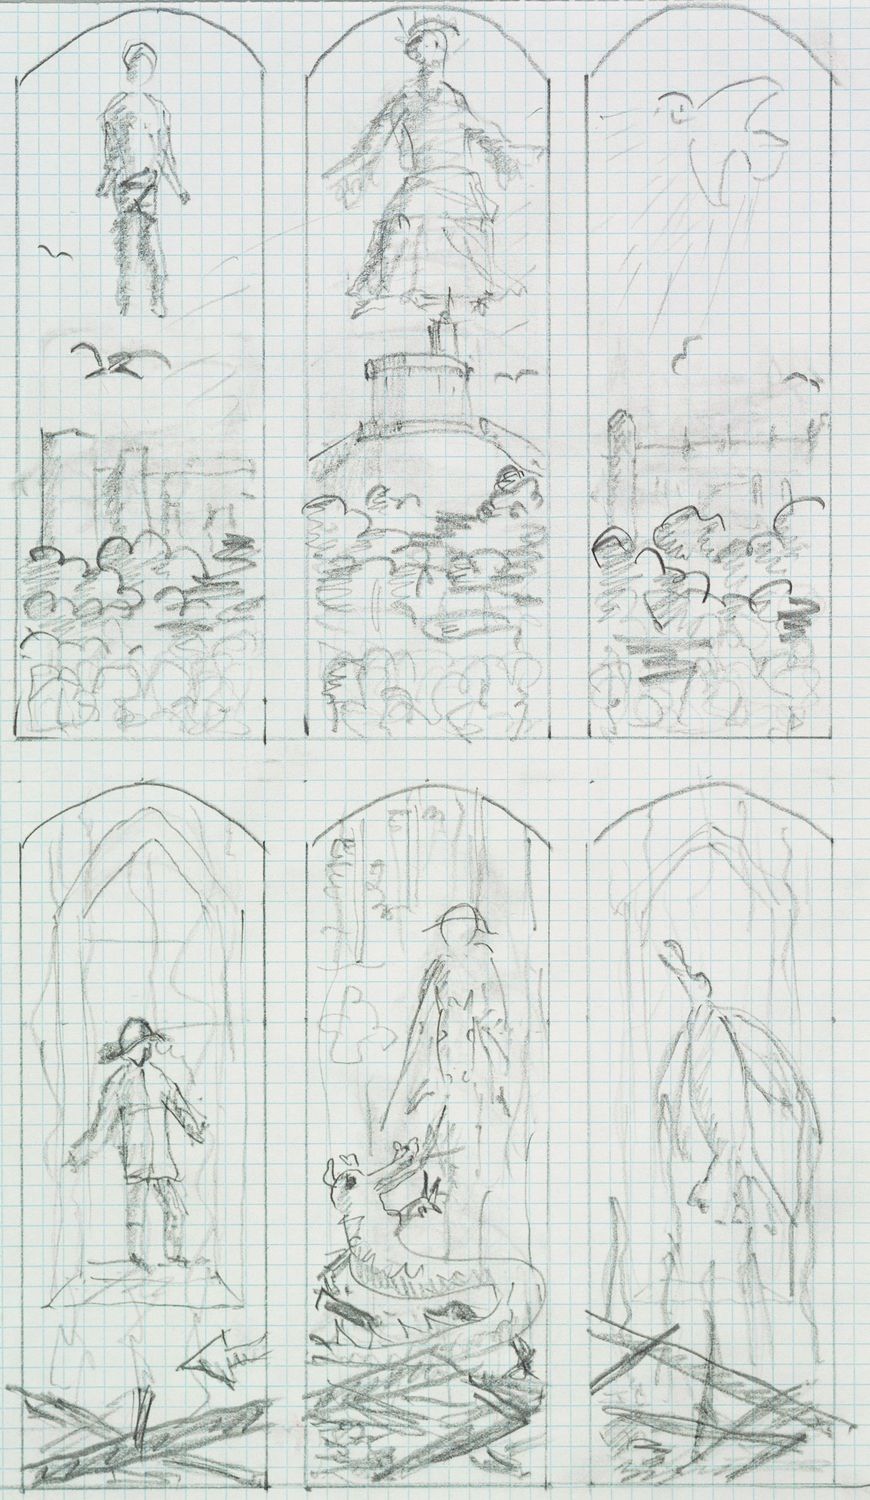 Prince Philip's sketches for the stained glass windows for a private chapel at Windsor Castle. Courtesy of the Royal Collection Trust.